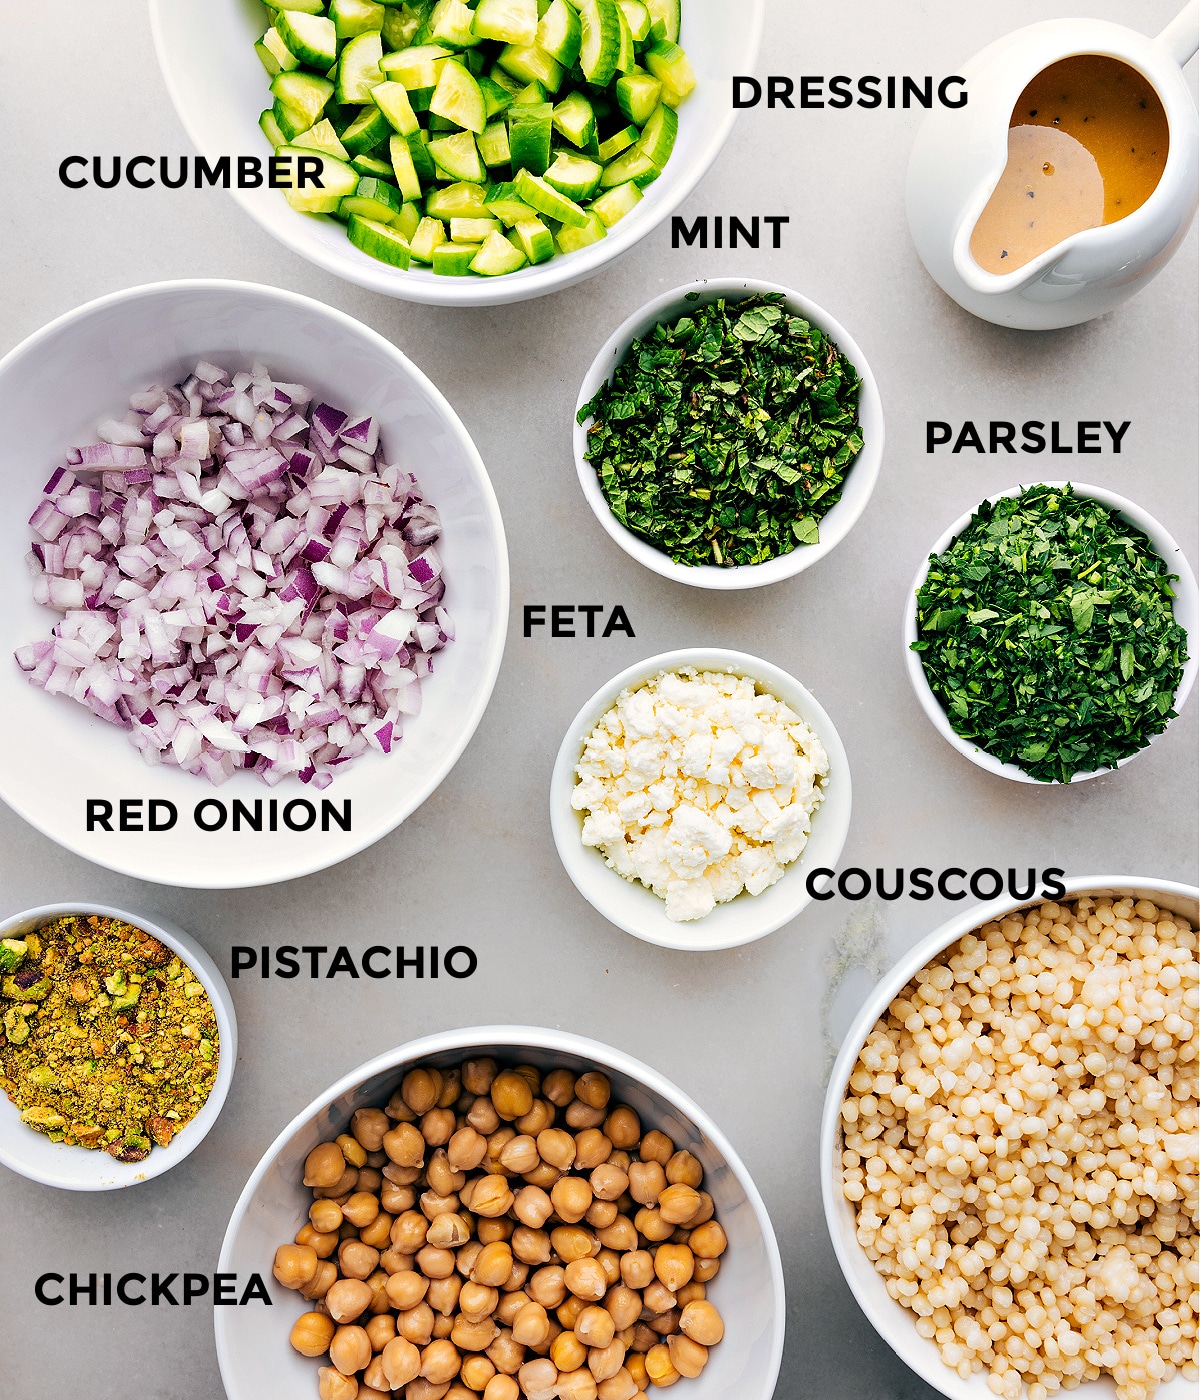 All the ingredients in this recipe are prepped for easy assembly, including cucumbers, mint, dressing, parsley, feta, couscous, pistachios, red onion, and chickpeas.